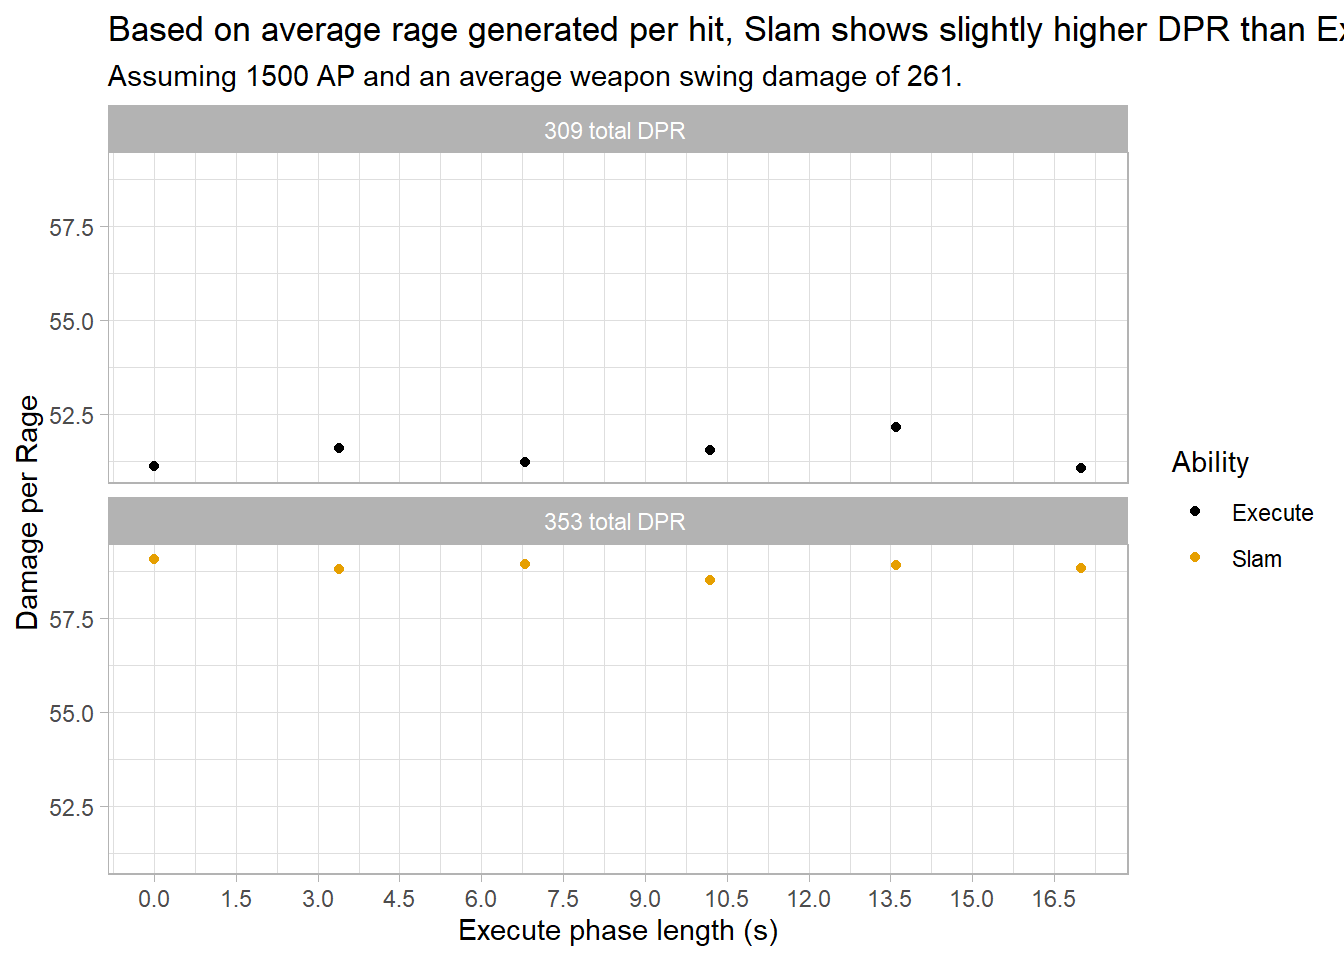 Comparison between Slam and Execute DPR during a 20 second long execute phase.